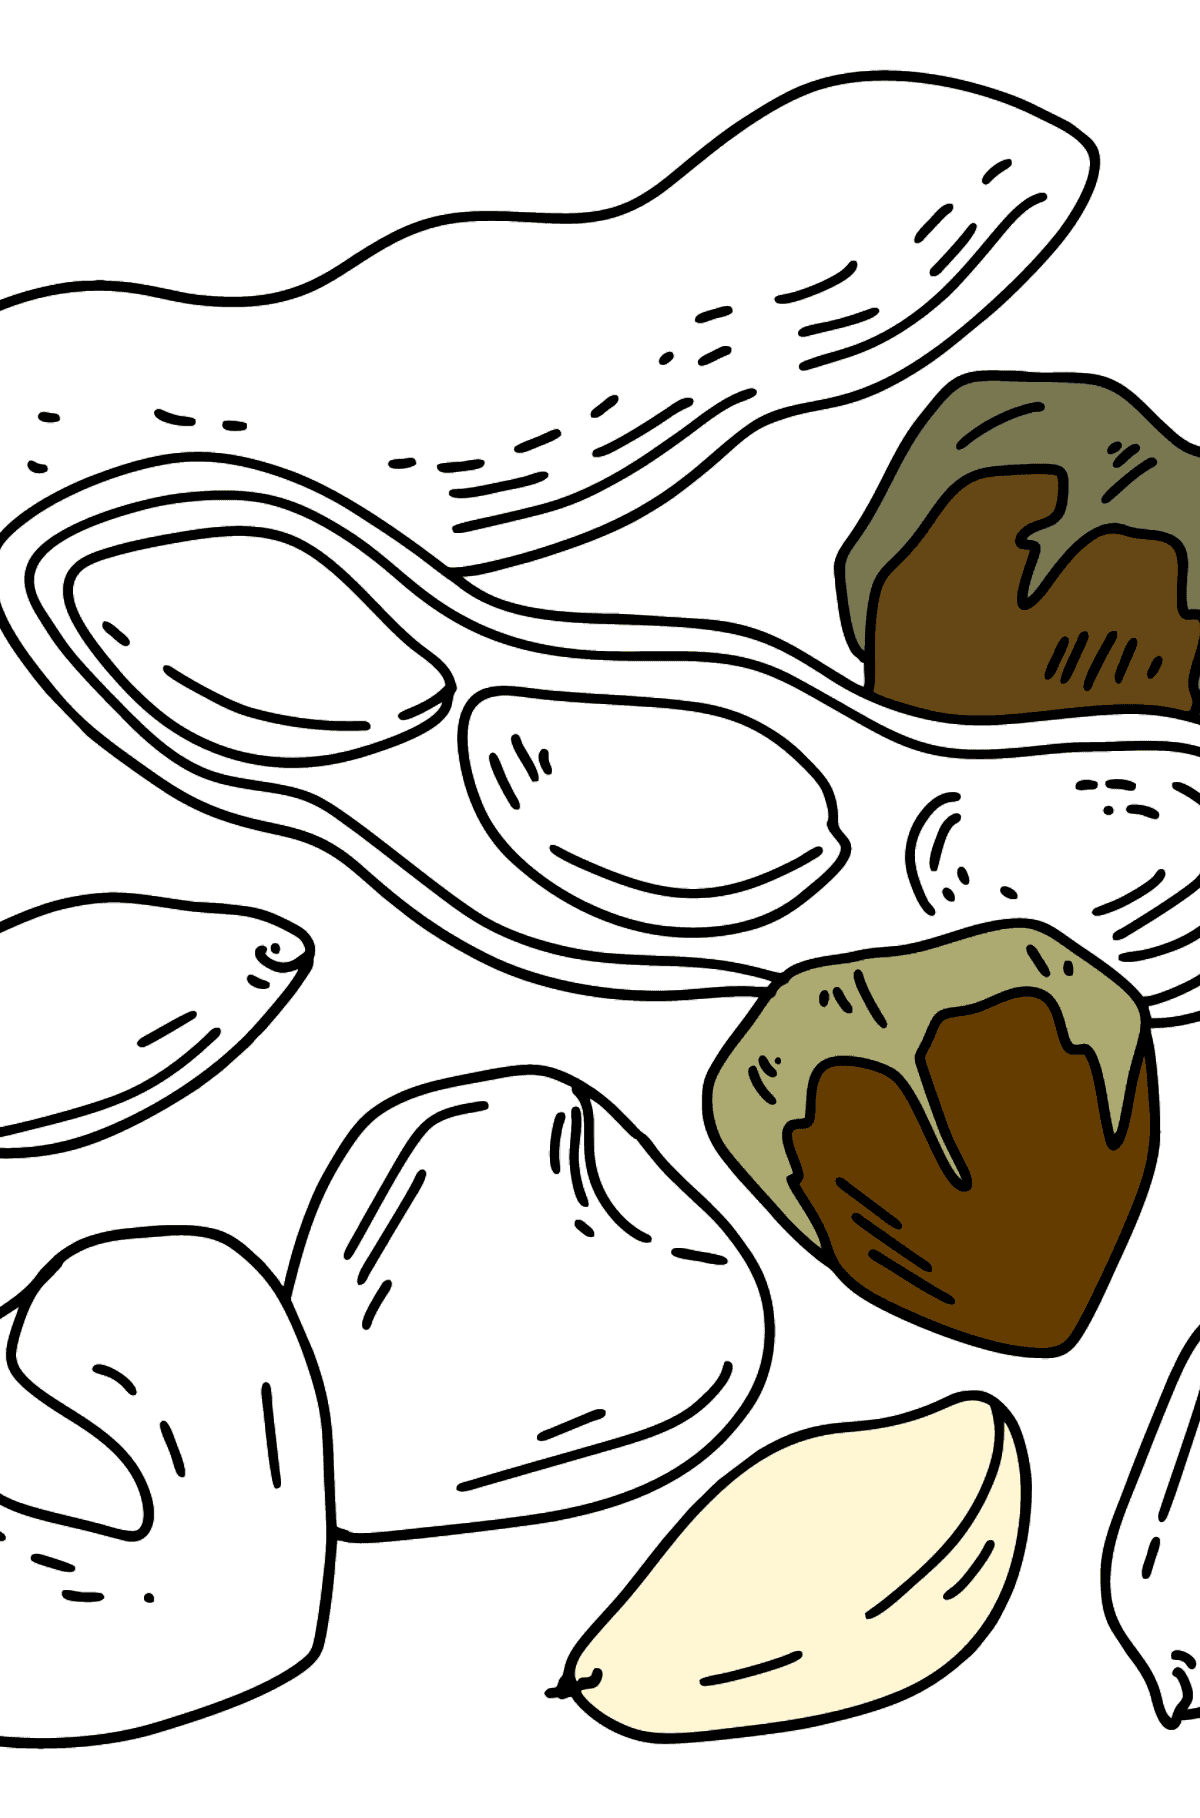 Nuts - Peanuts and Hazelnuts coloring page - Coloring Pages for Kids